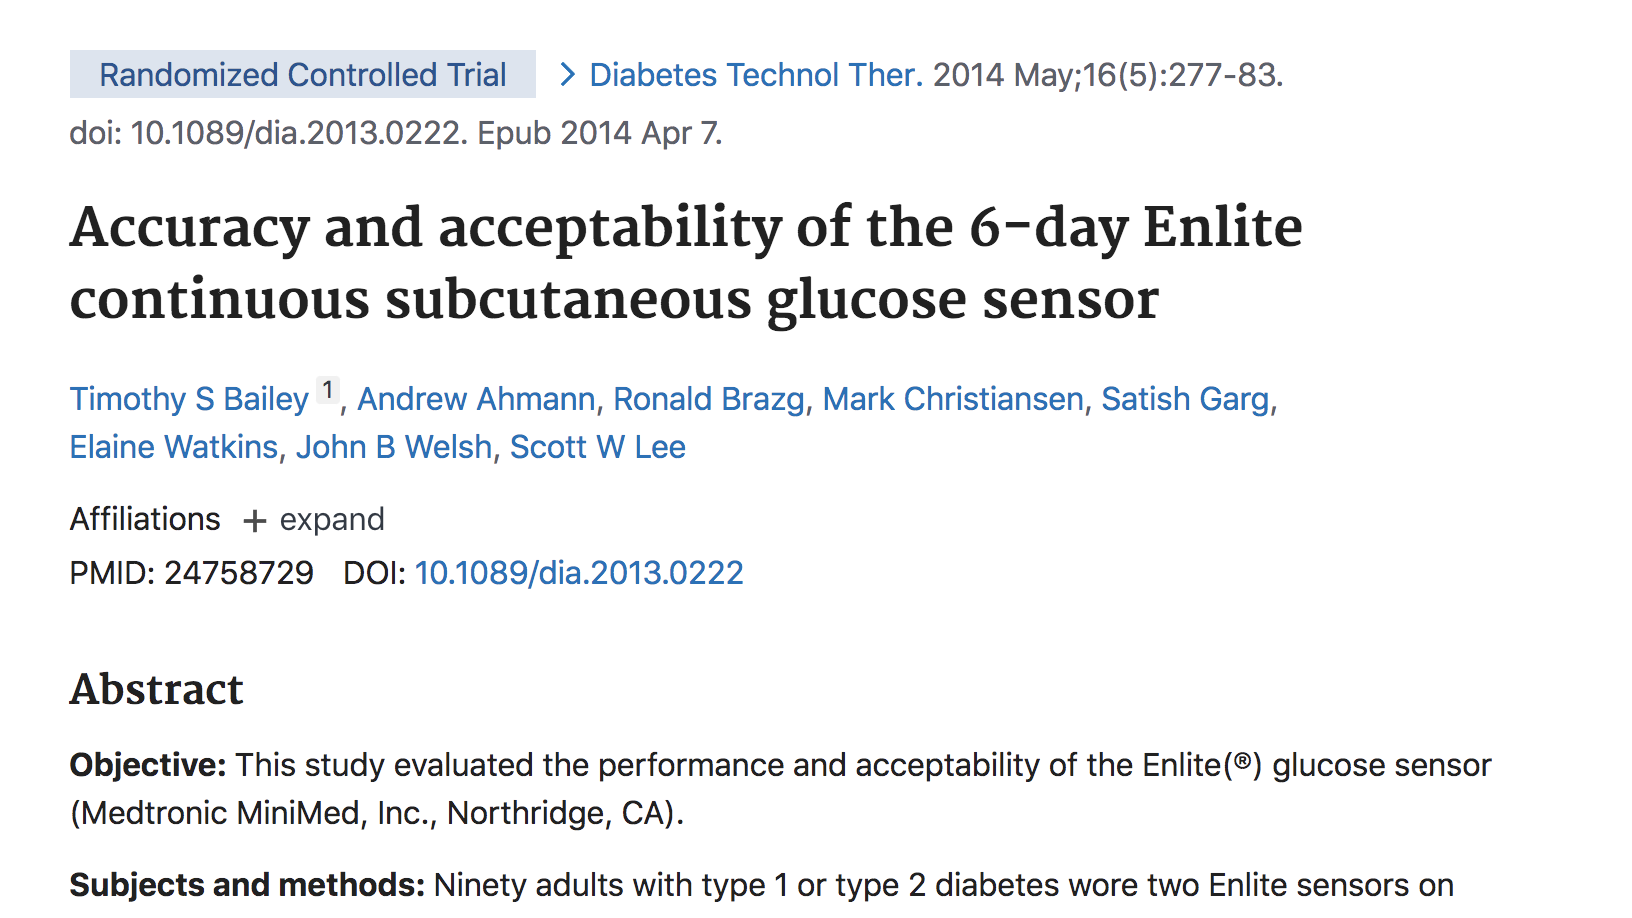 image of Accuracy and acceptability of the 6-day Enlite continuous subcutaneous glucose sensor